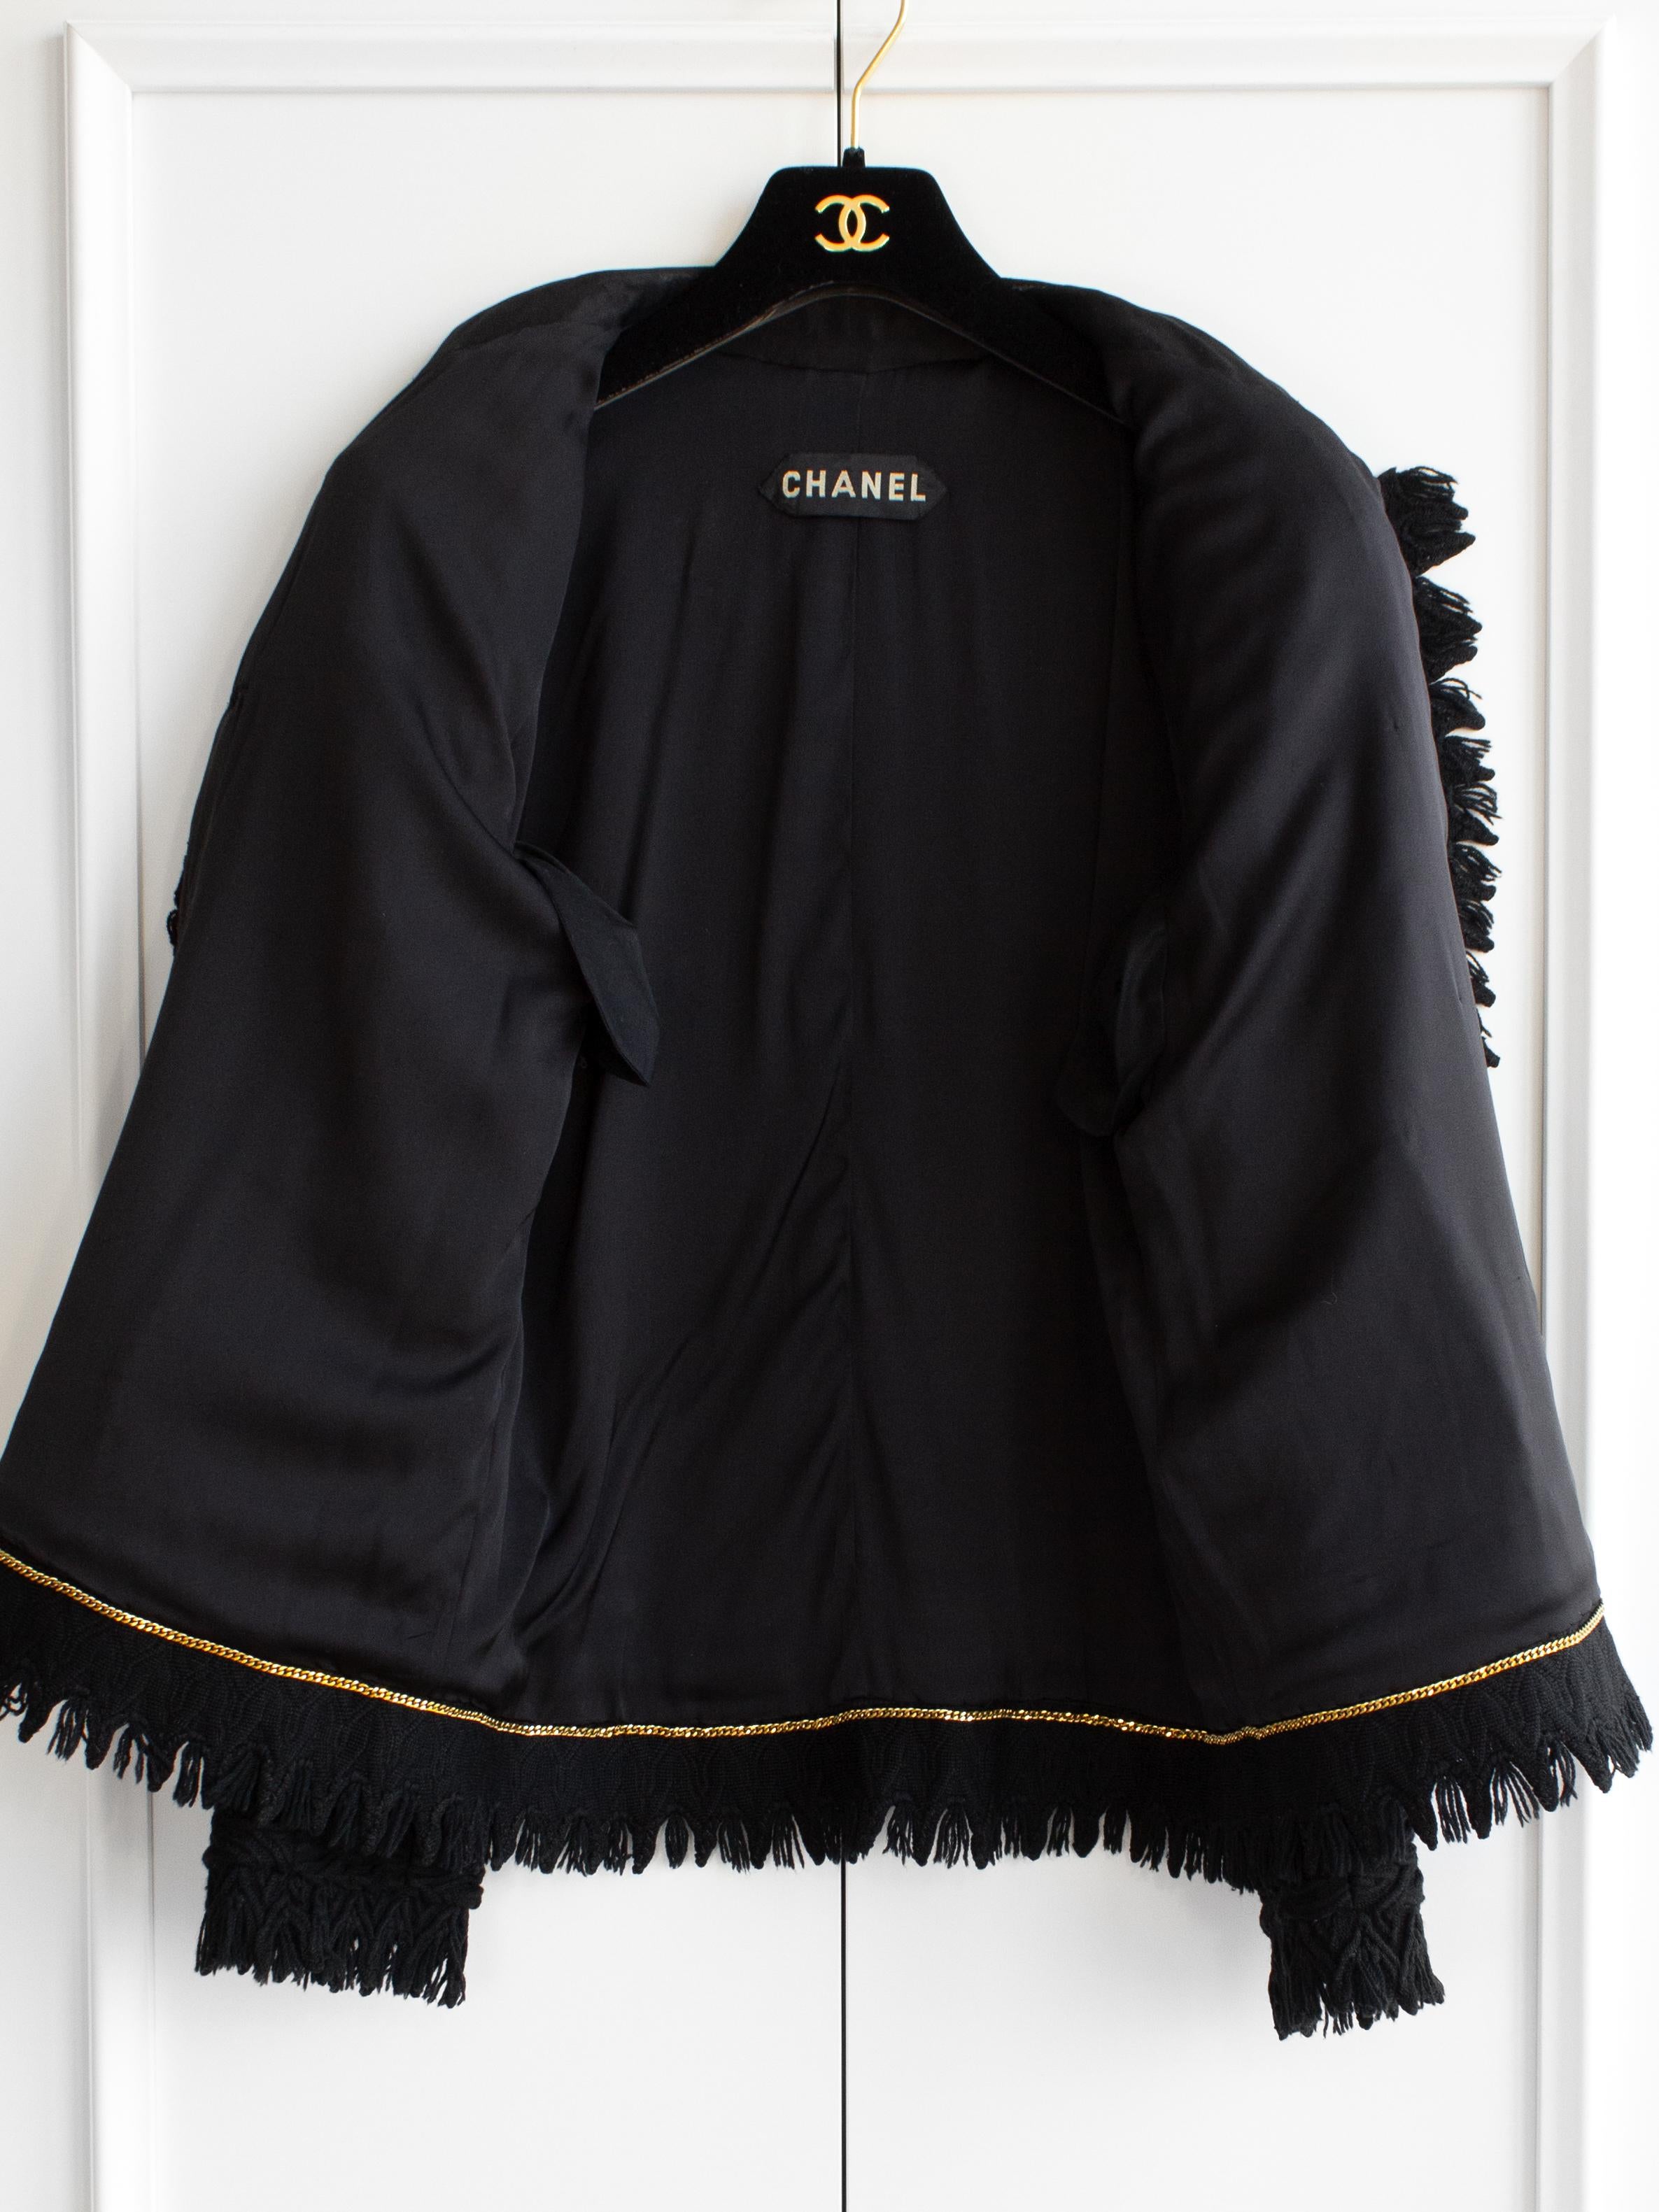 Rare Chanel Haute Couture F/W 1970 Jackie Black Gold CC Fringe LBJ Tweed Jacket For Sale 9